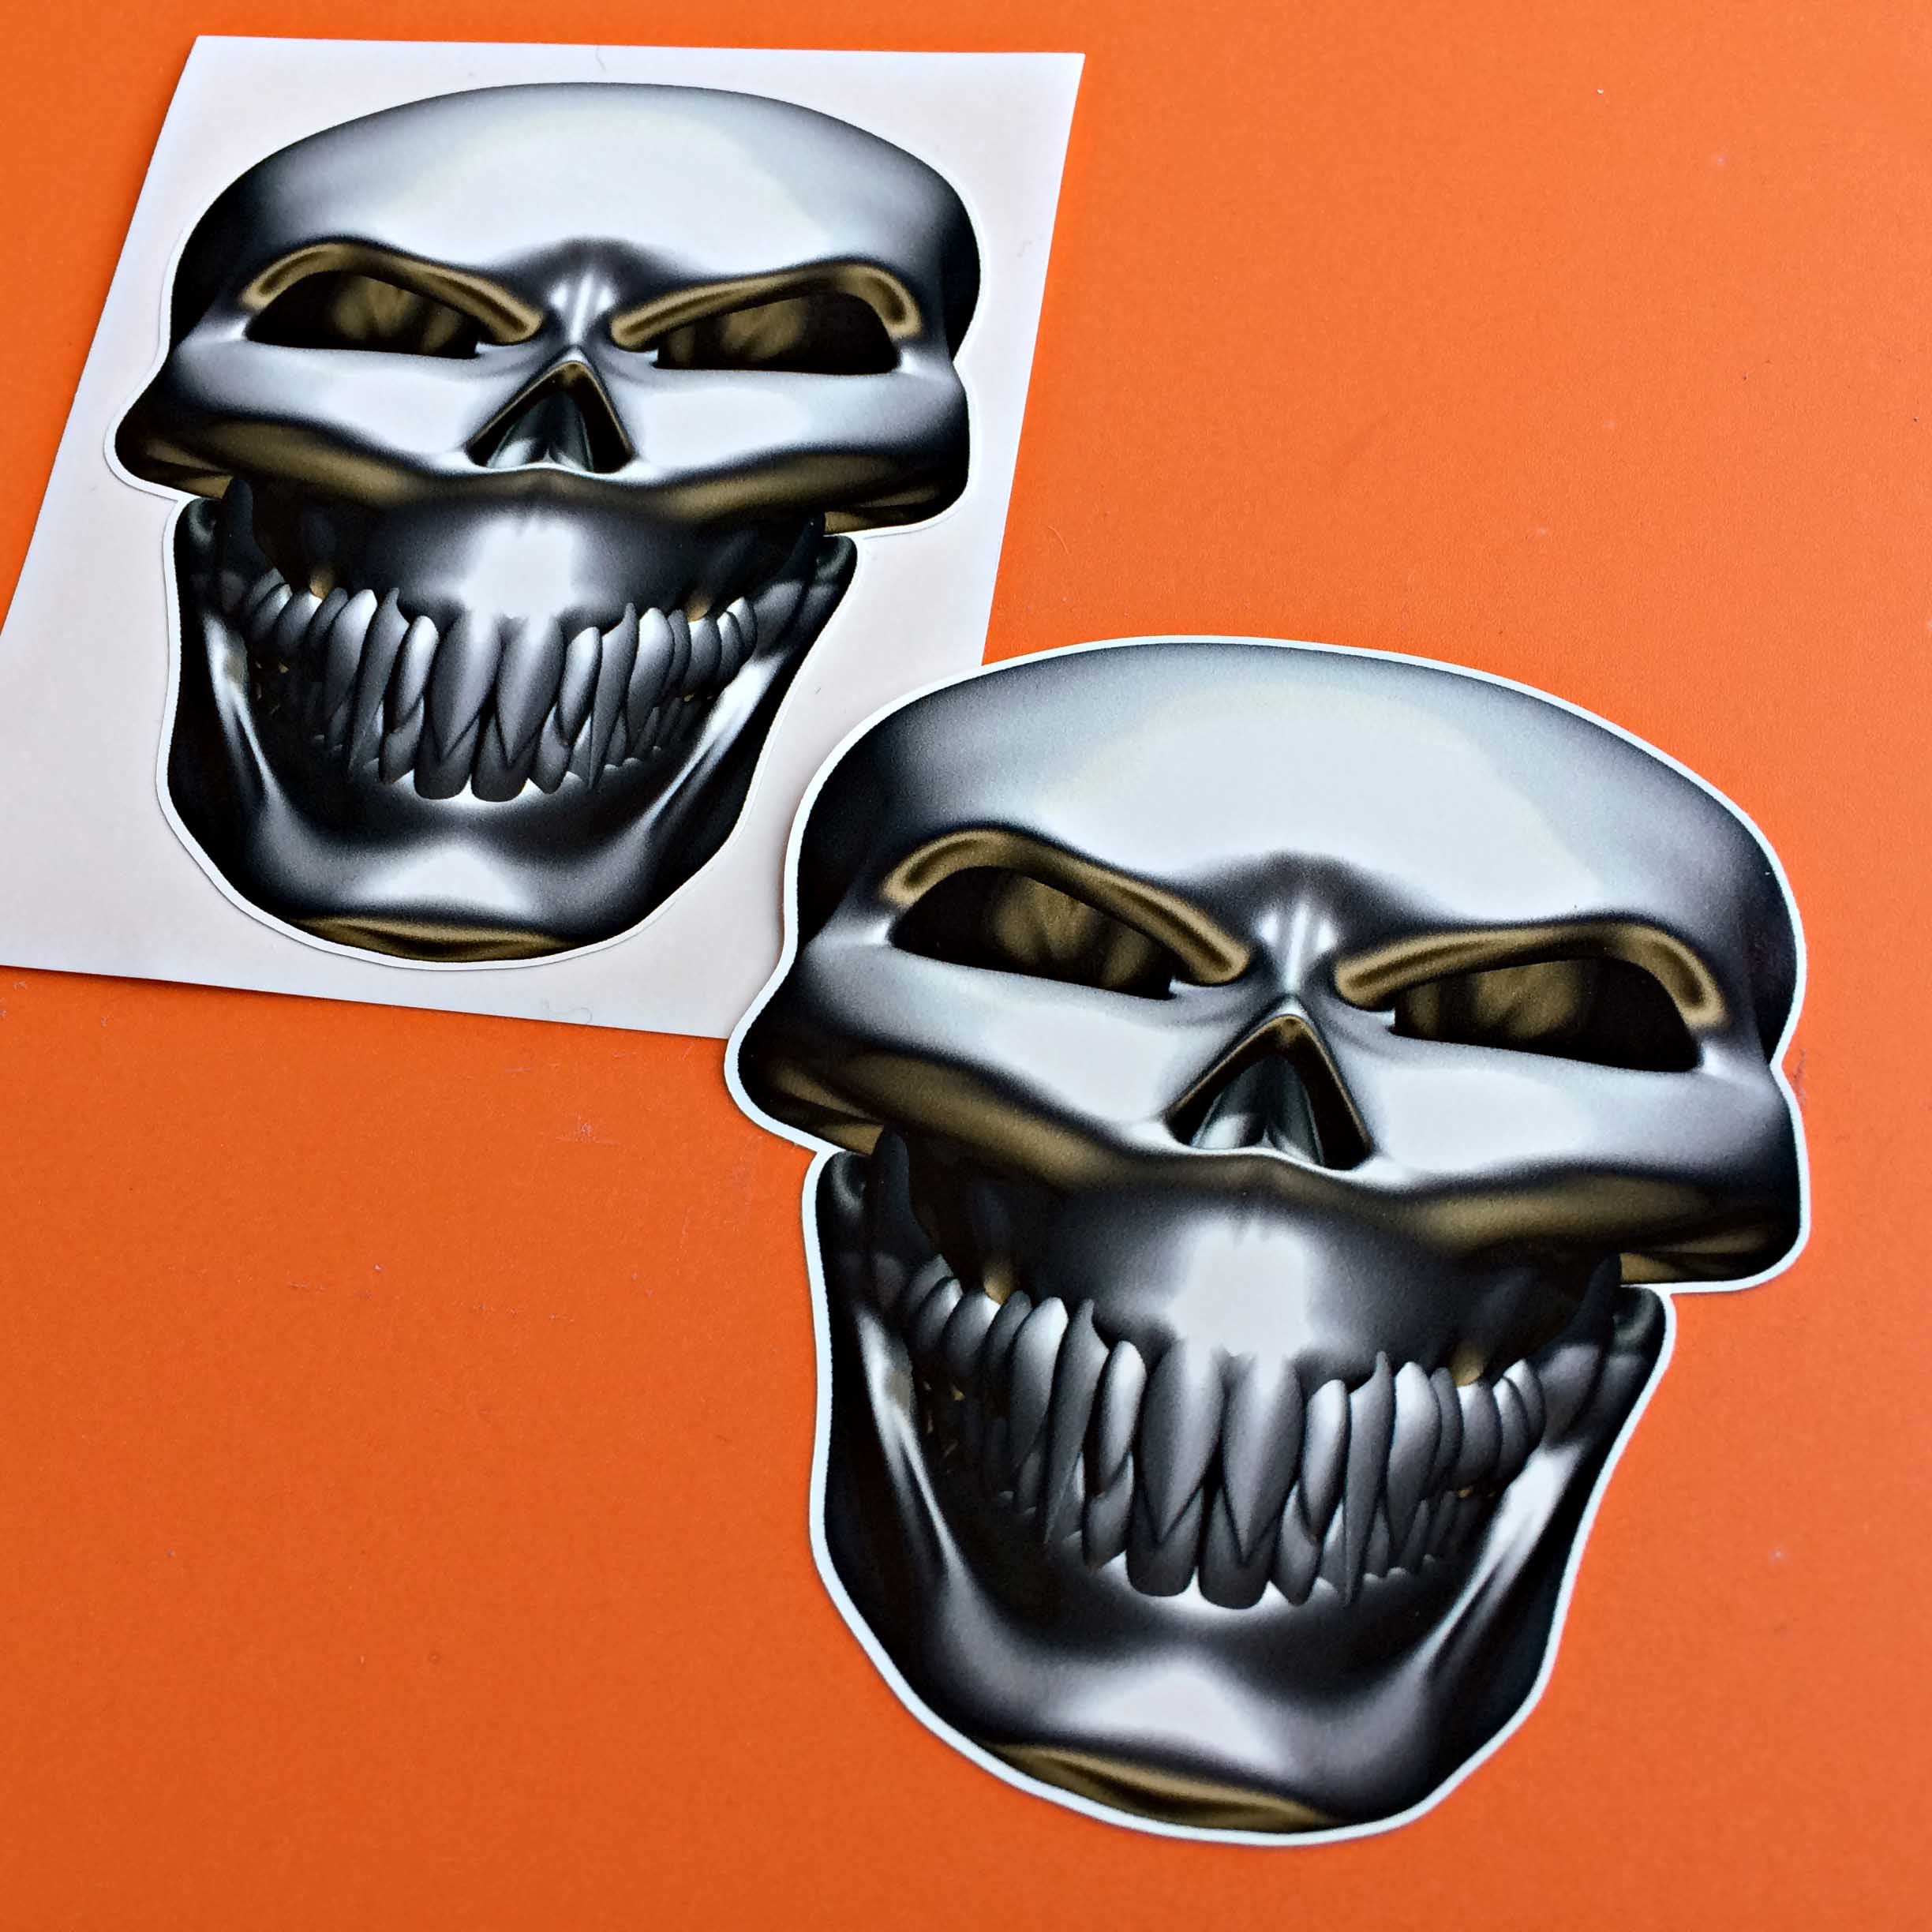 METAL SKULL STICKERS. Front view of a metal skull with teeth. The eye sockets and cheekbones are gold.